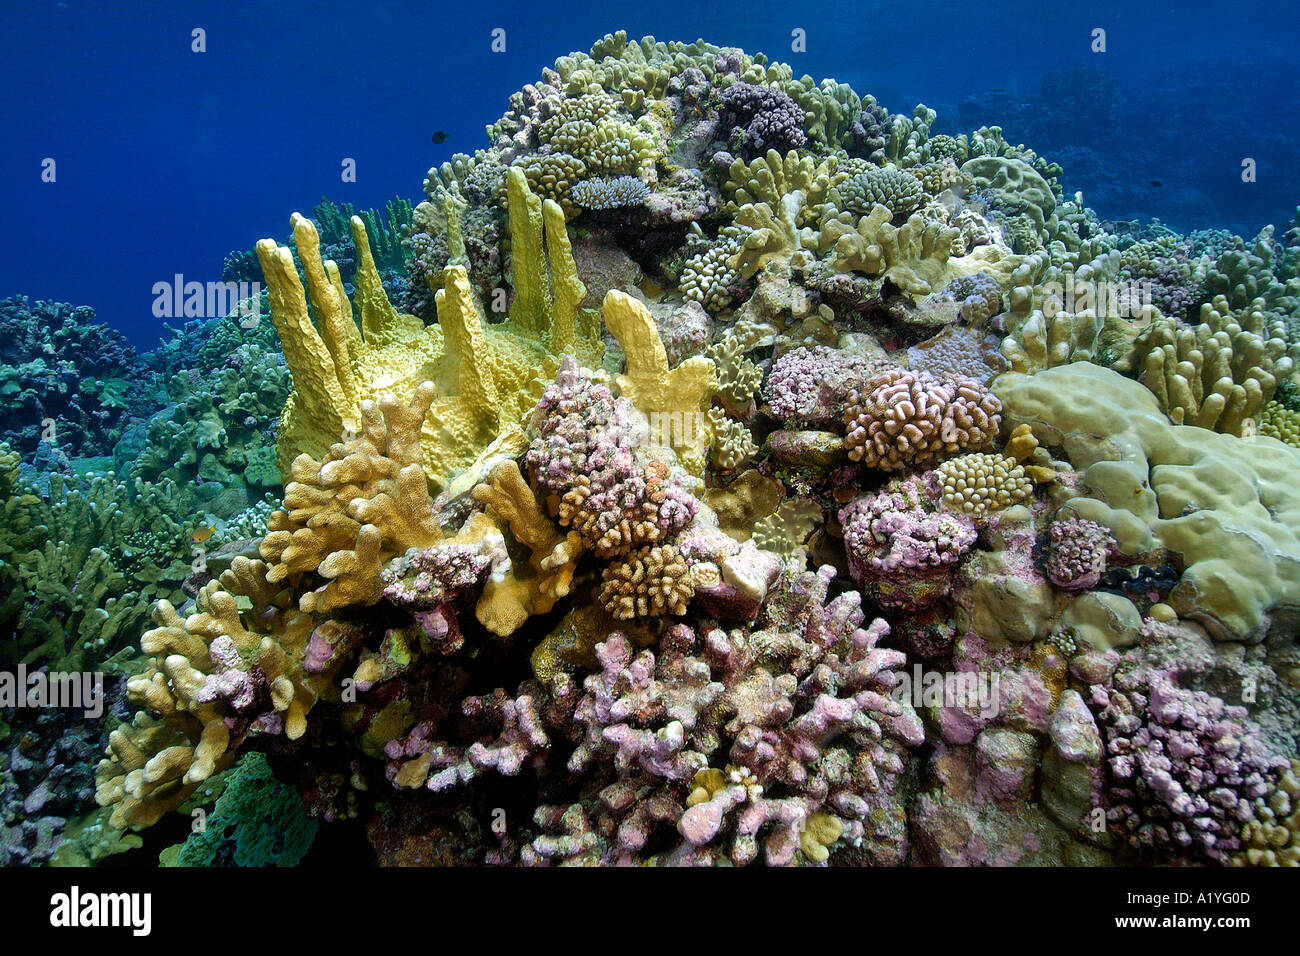 Coral reef mainly fire coral Millepora platyphylla and cauliflower coral Pocillopora meandrina Namu atoll Marshall Islands Stock Photo